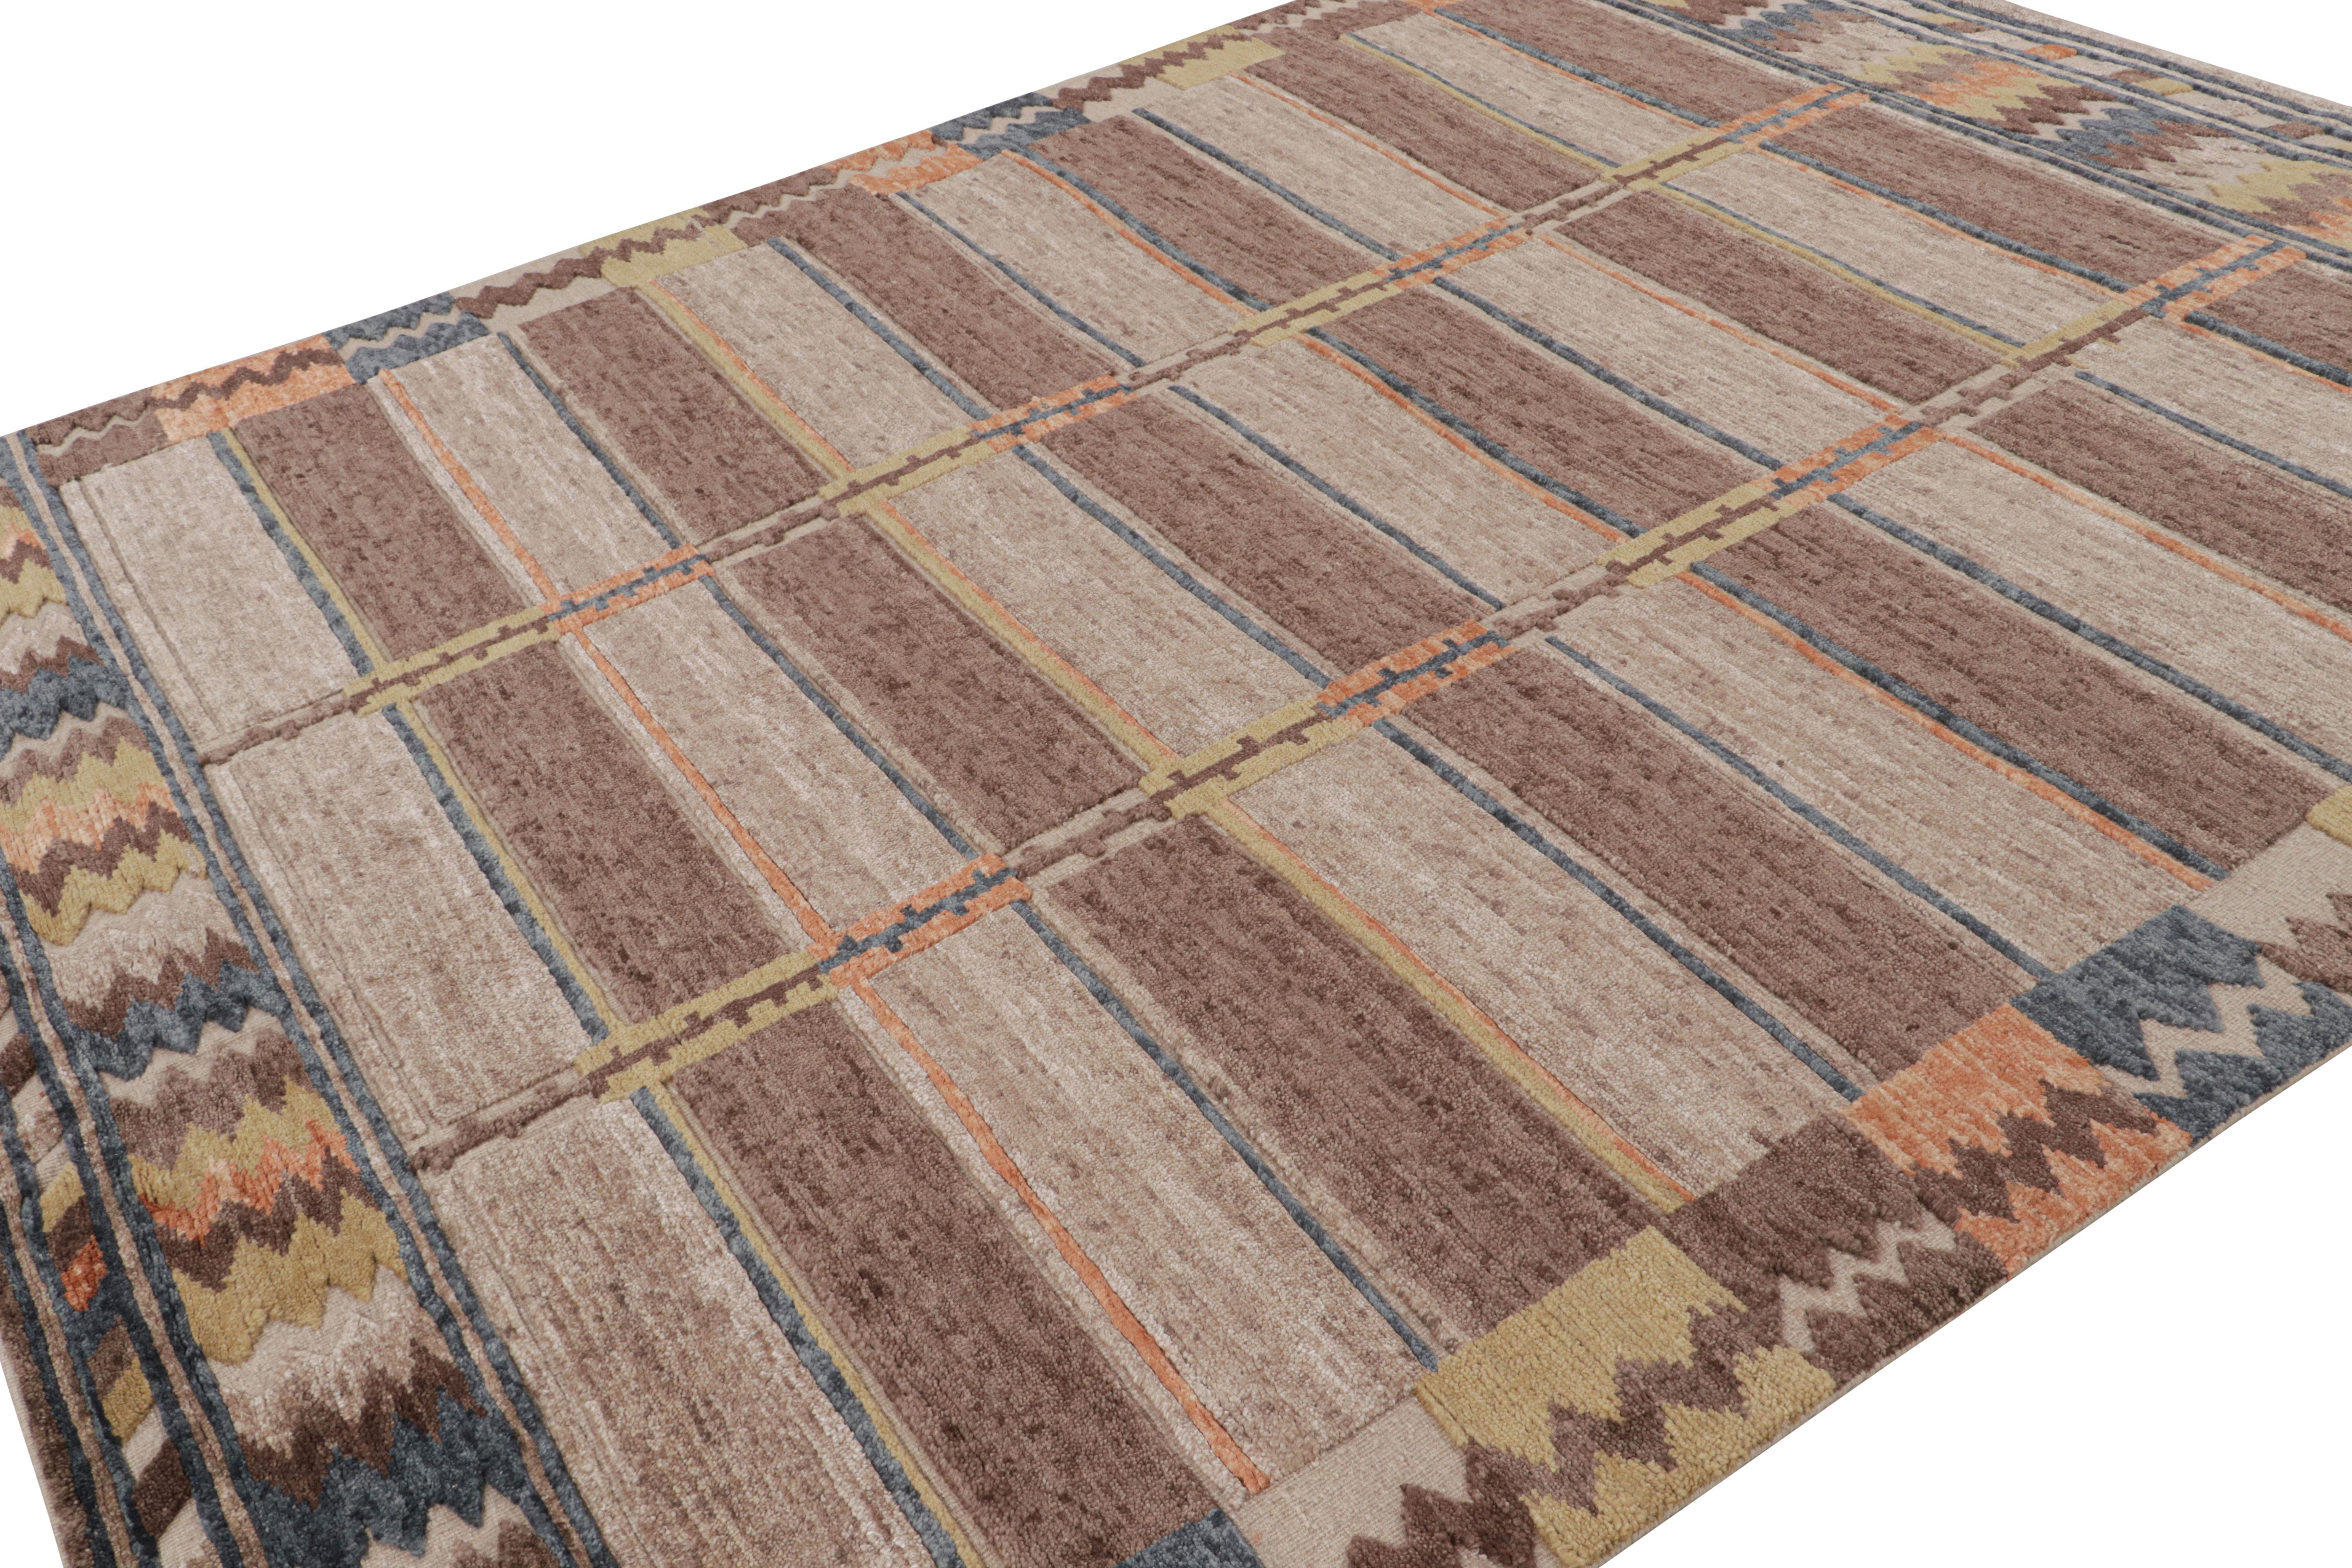 Hand-knotted in wool, this 8x10 Scandinavian rug is from Rug & Kilim’s “Scandinavian High” line. 

On the design: 

Admirers of the craft may admire the deft hand that marries the high-low textural element with the geometry—lends such a movement and